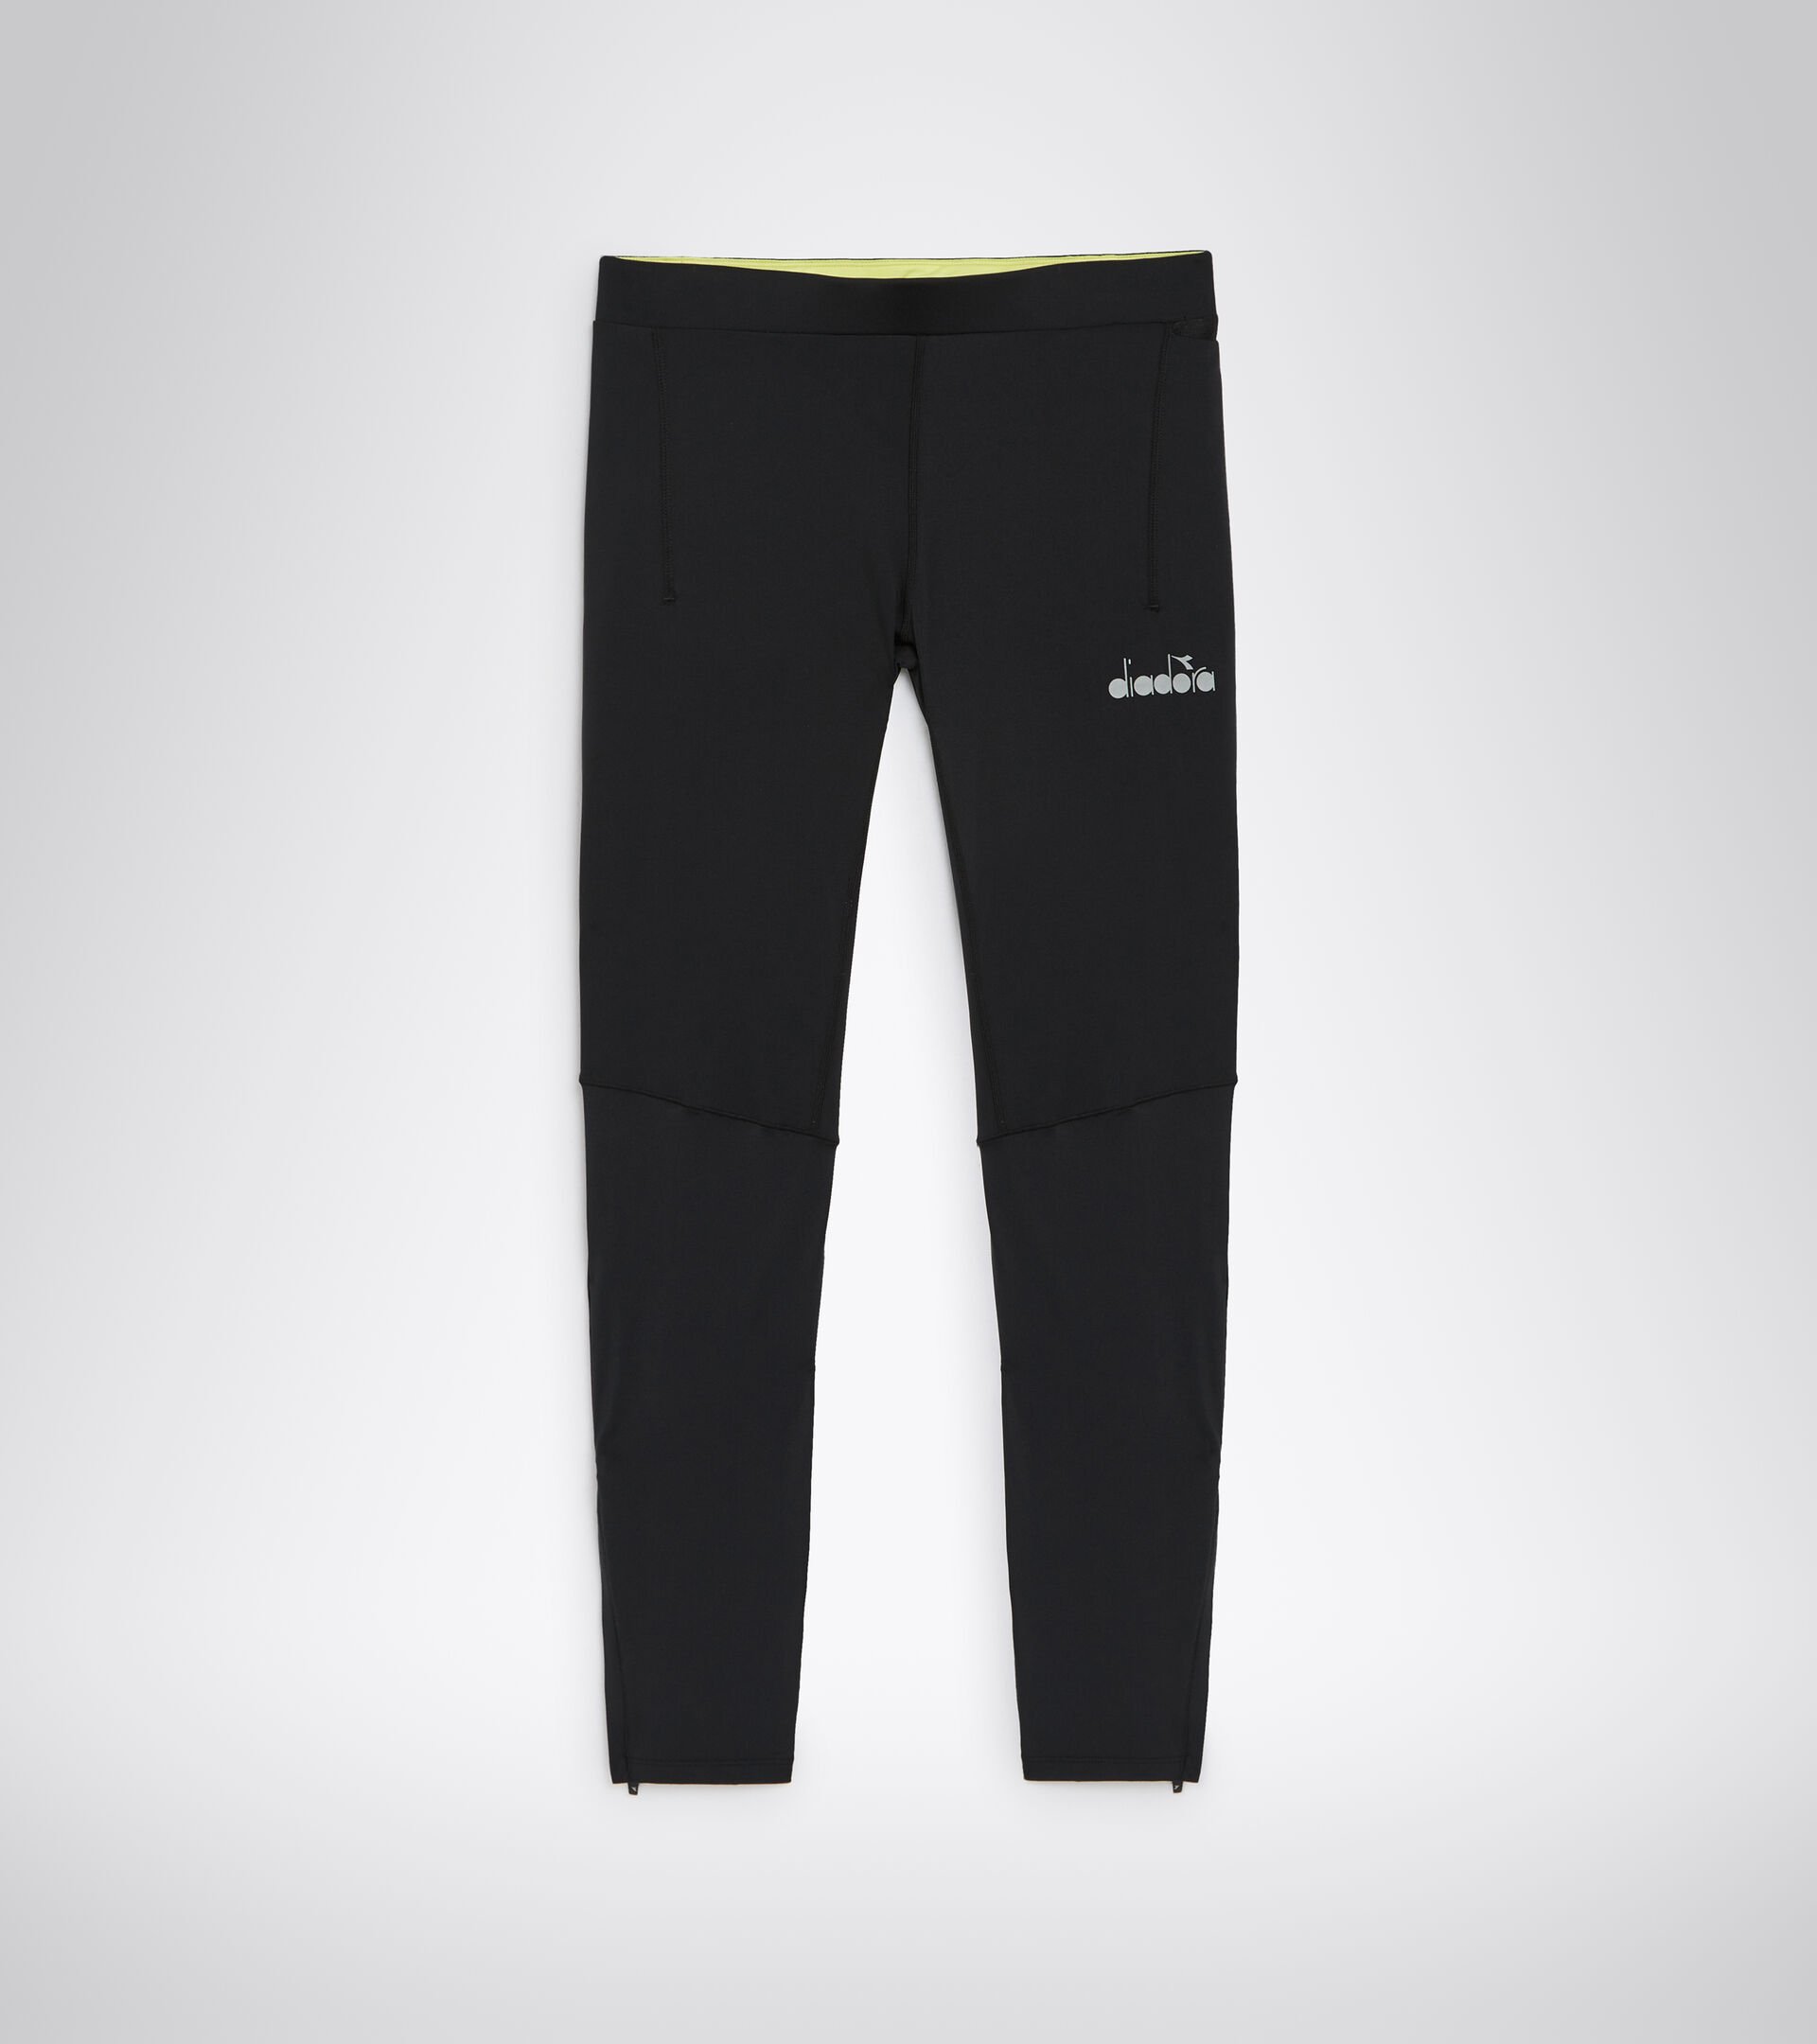 WINTER RUNNING TIGHTS BE ONE